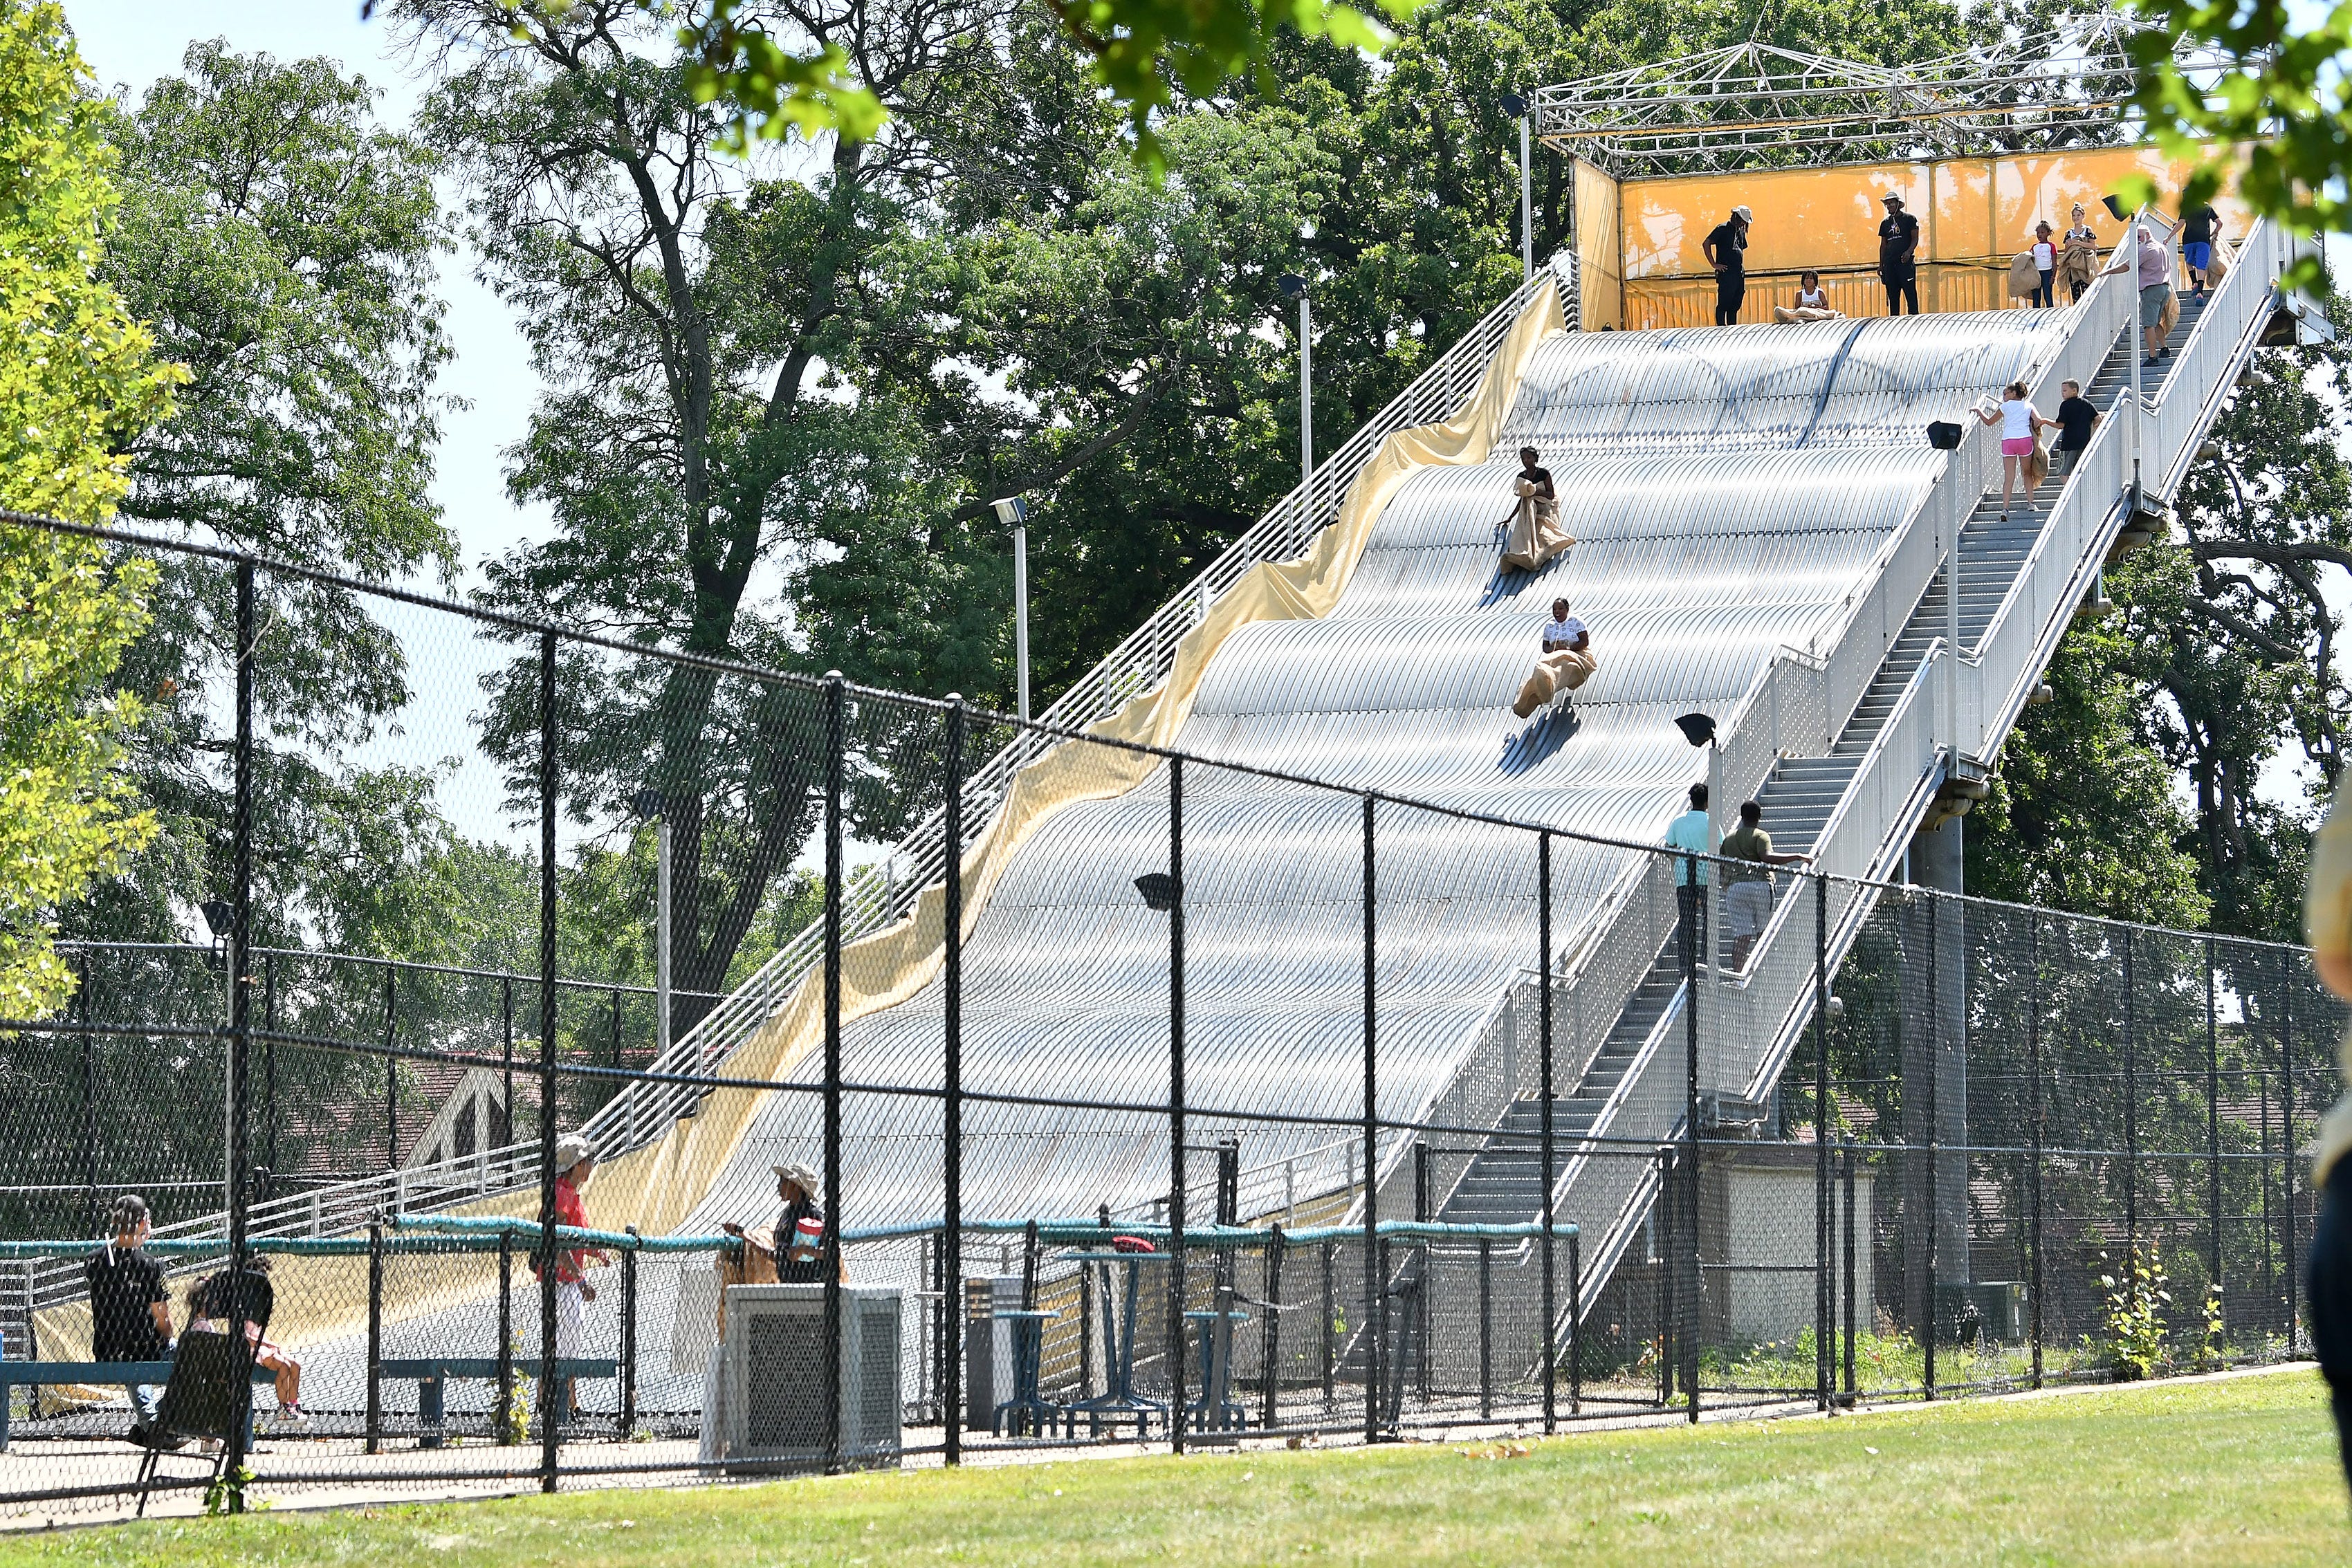 People go down the giant slide on Belle Isle in Detroit on Aug. 19, 2022.